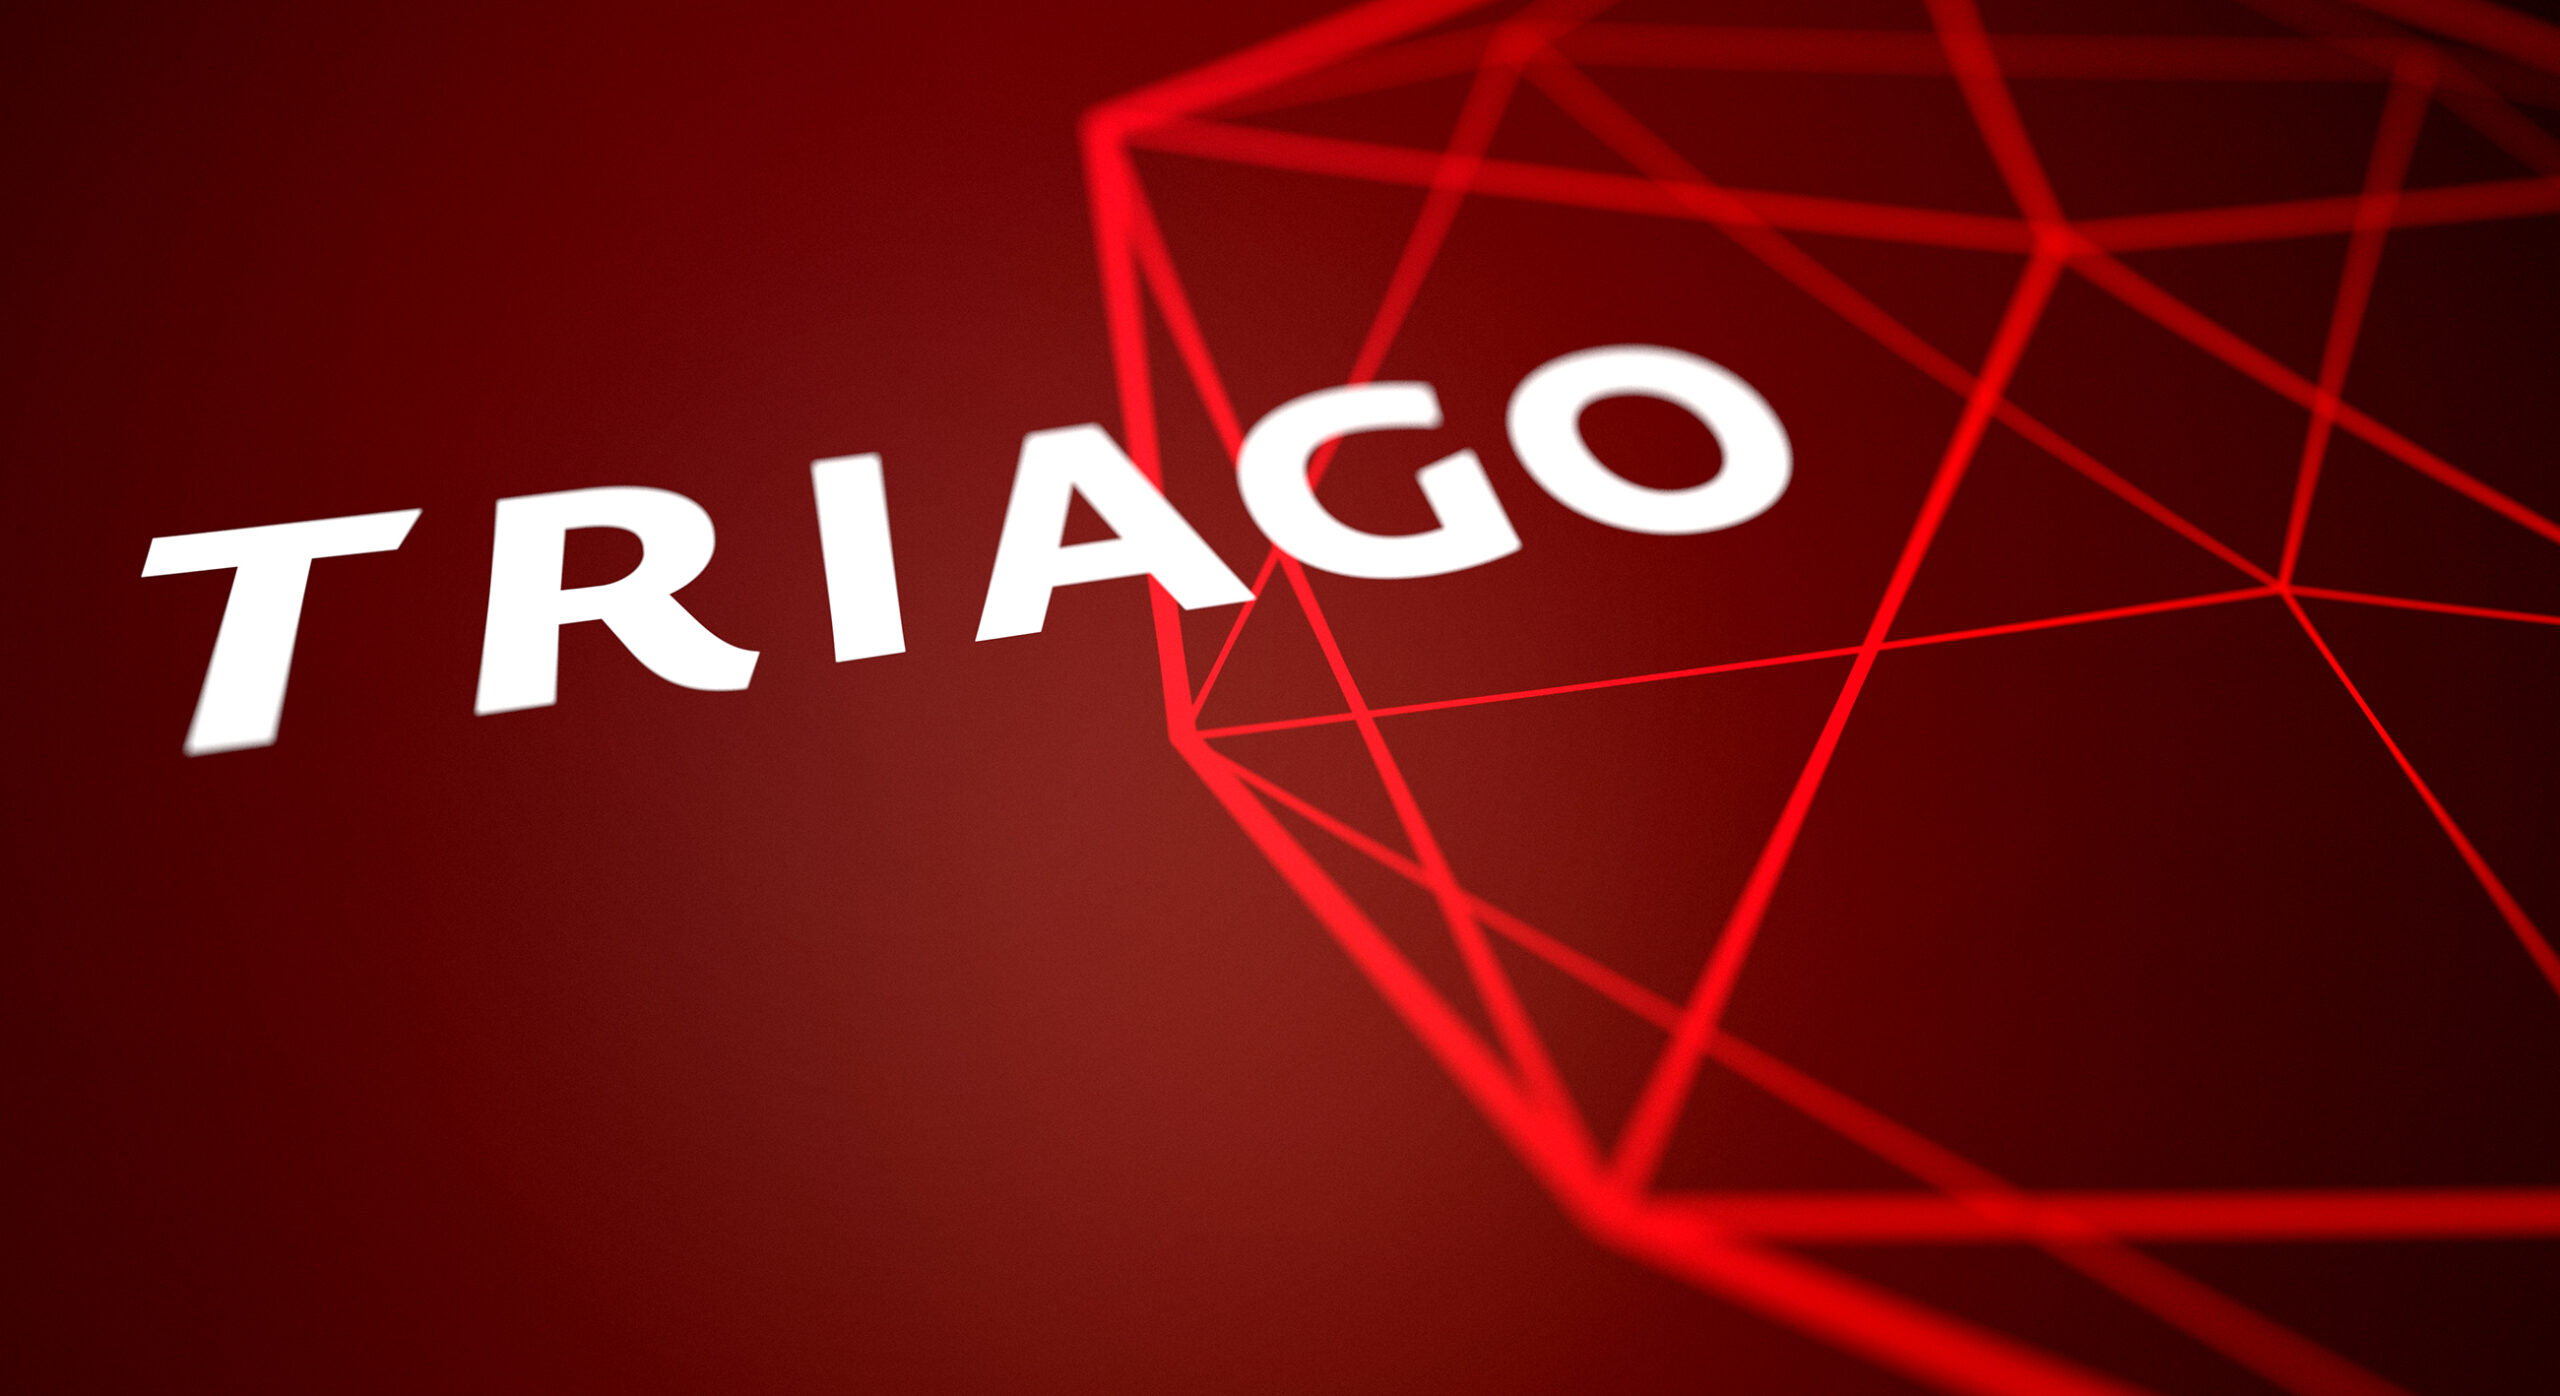 The Triago brand features warm red colours combined with a striking brand graphic device.